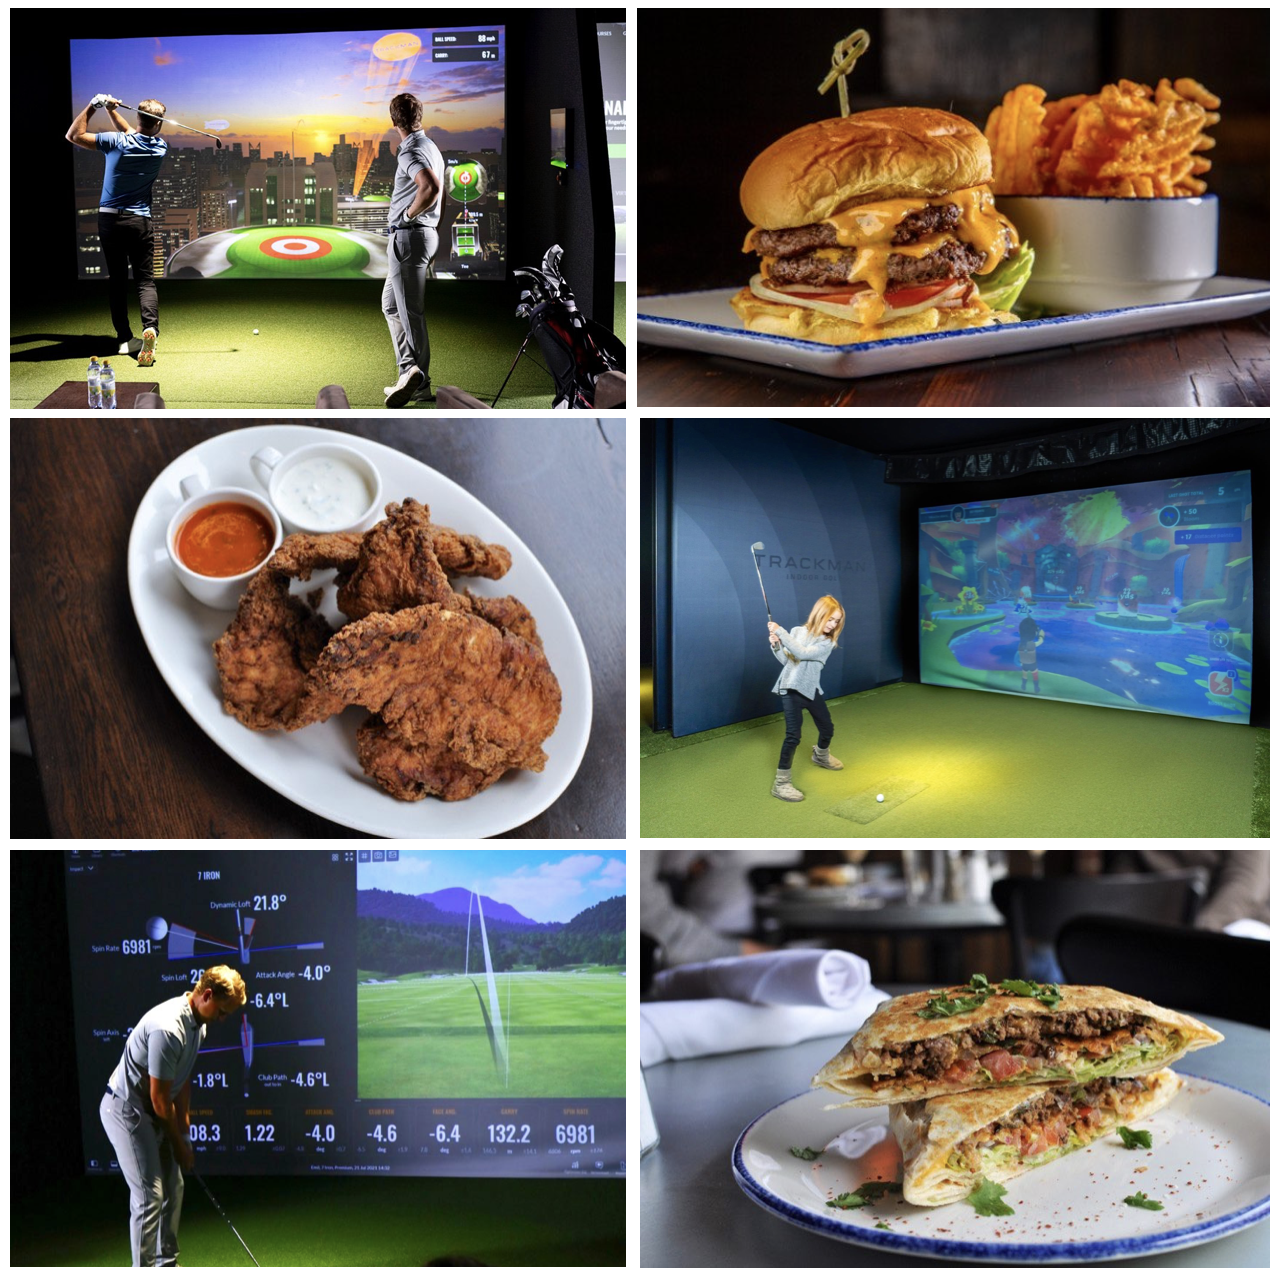 Matchplay Golf and Sports Lounge